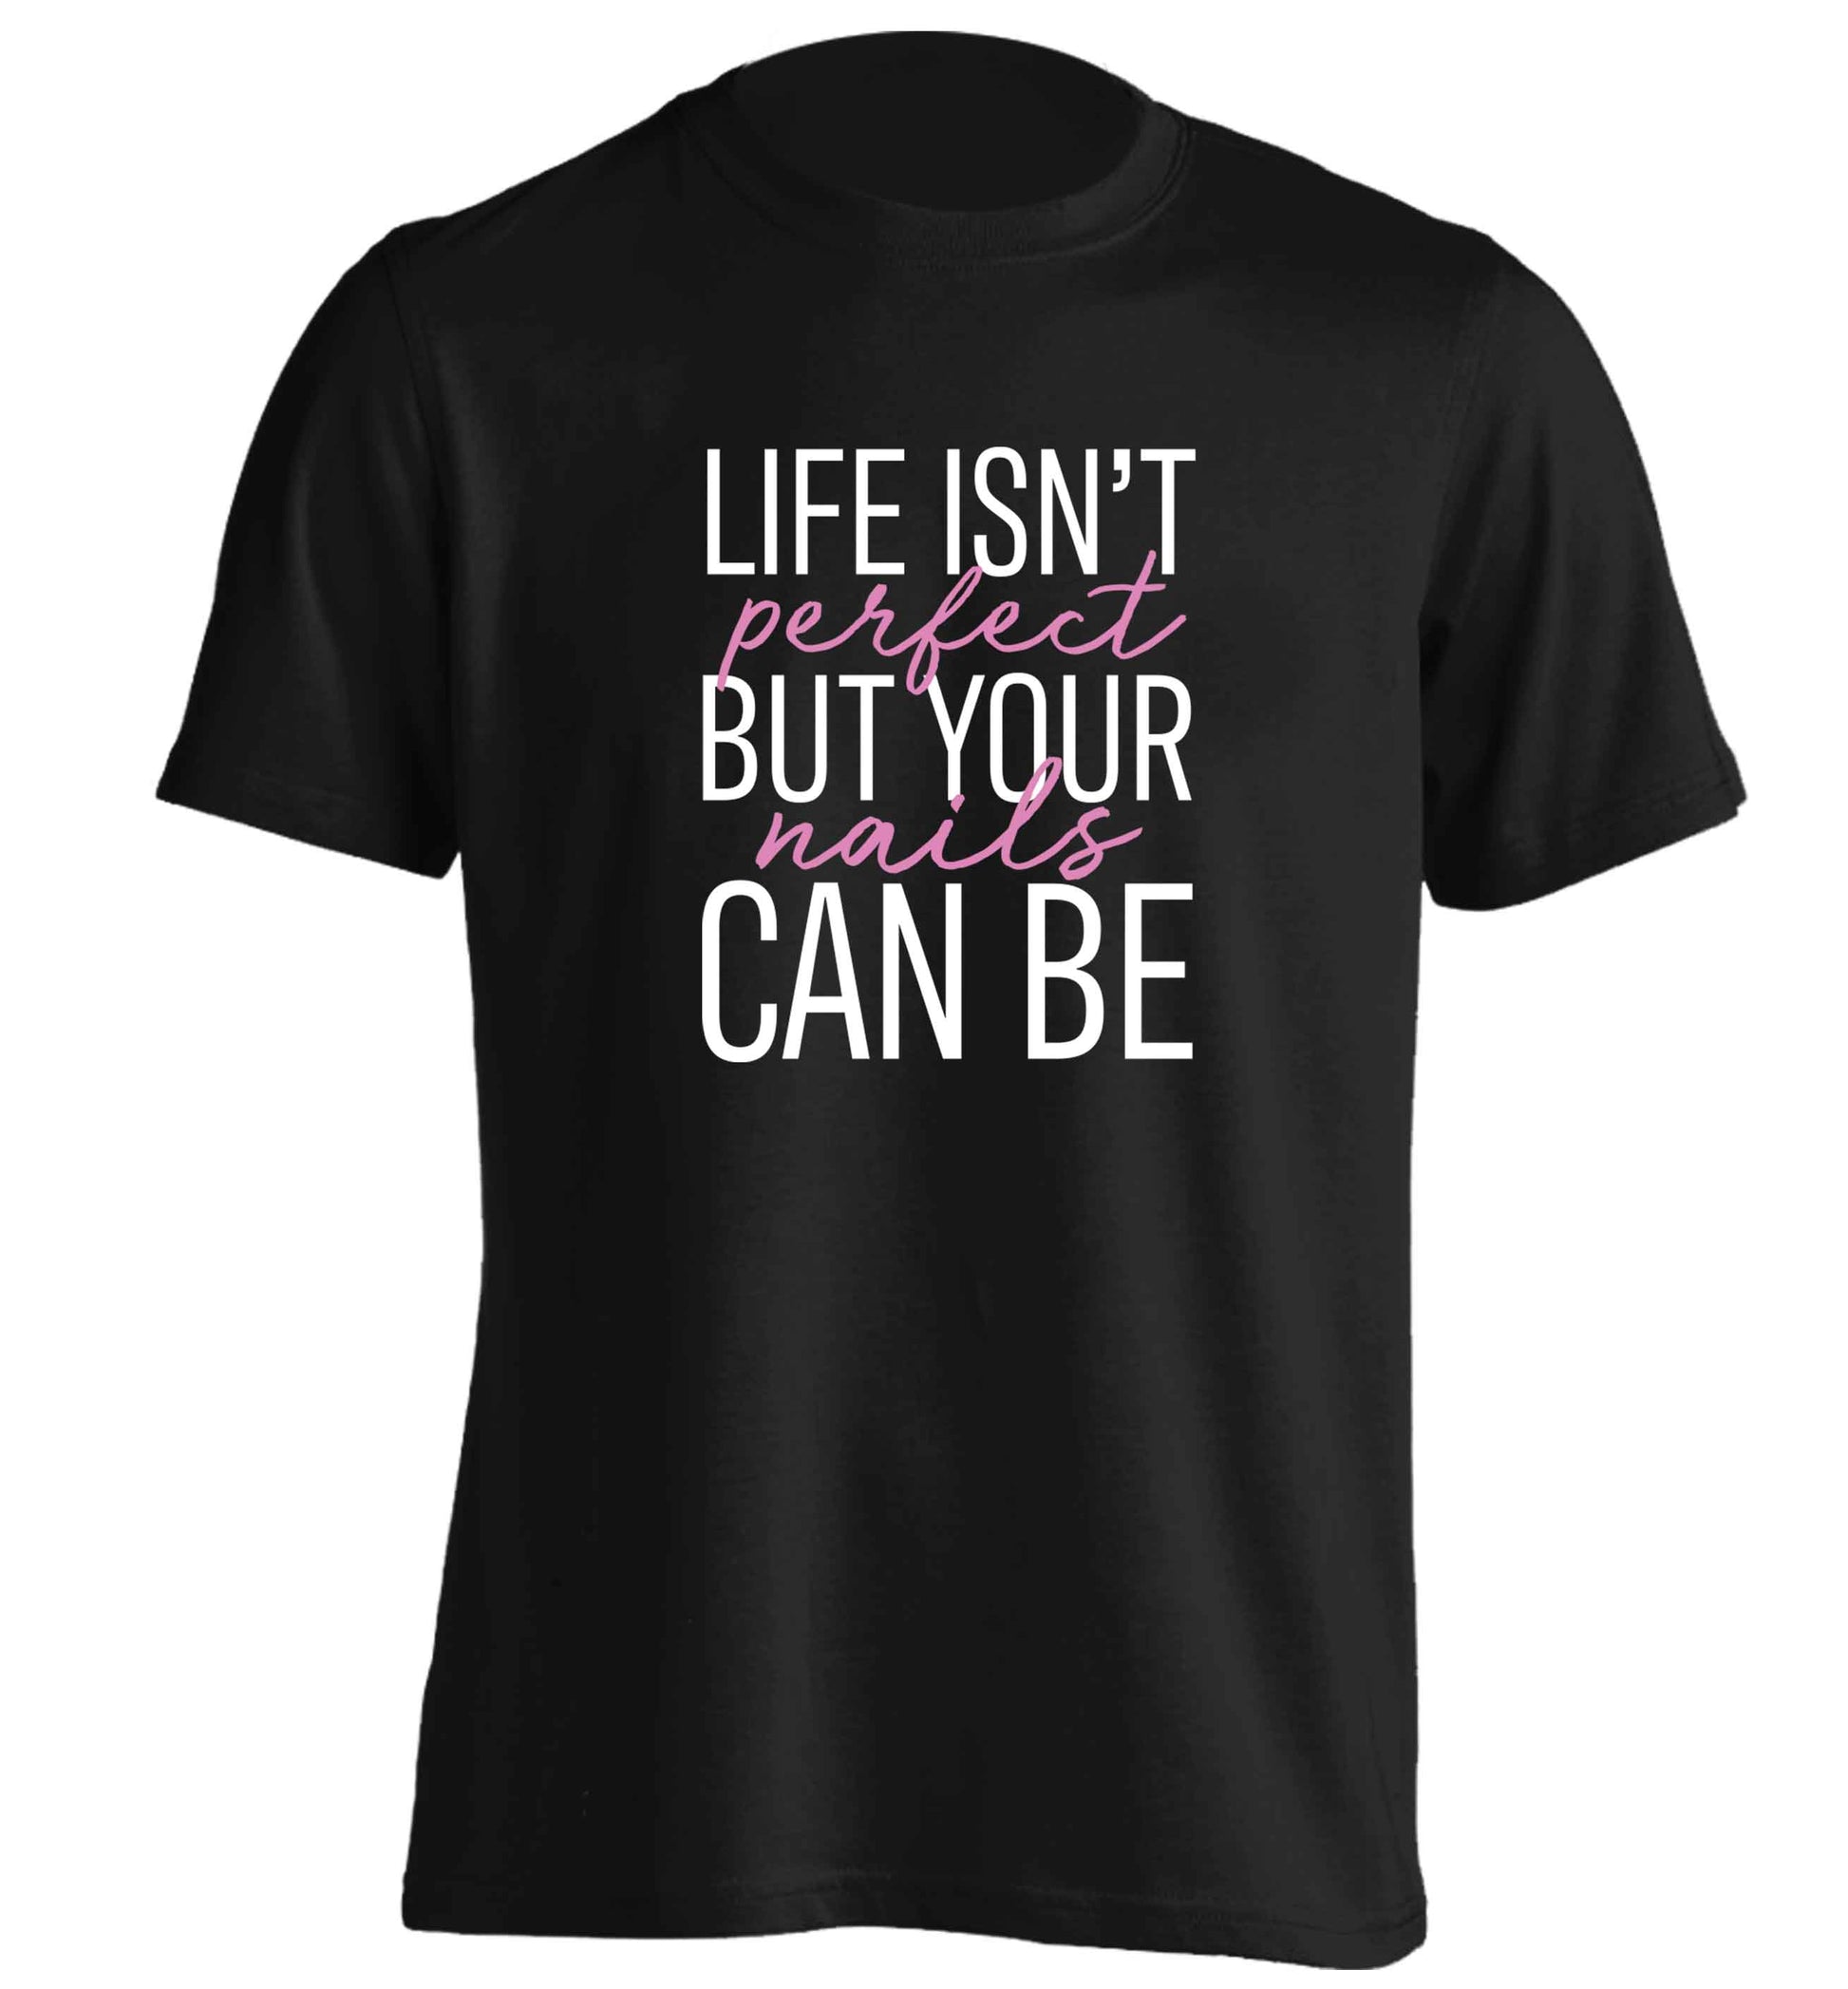 Life isn't perfect but your nails can be adults unisex black Tshirt 2XL